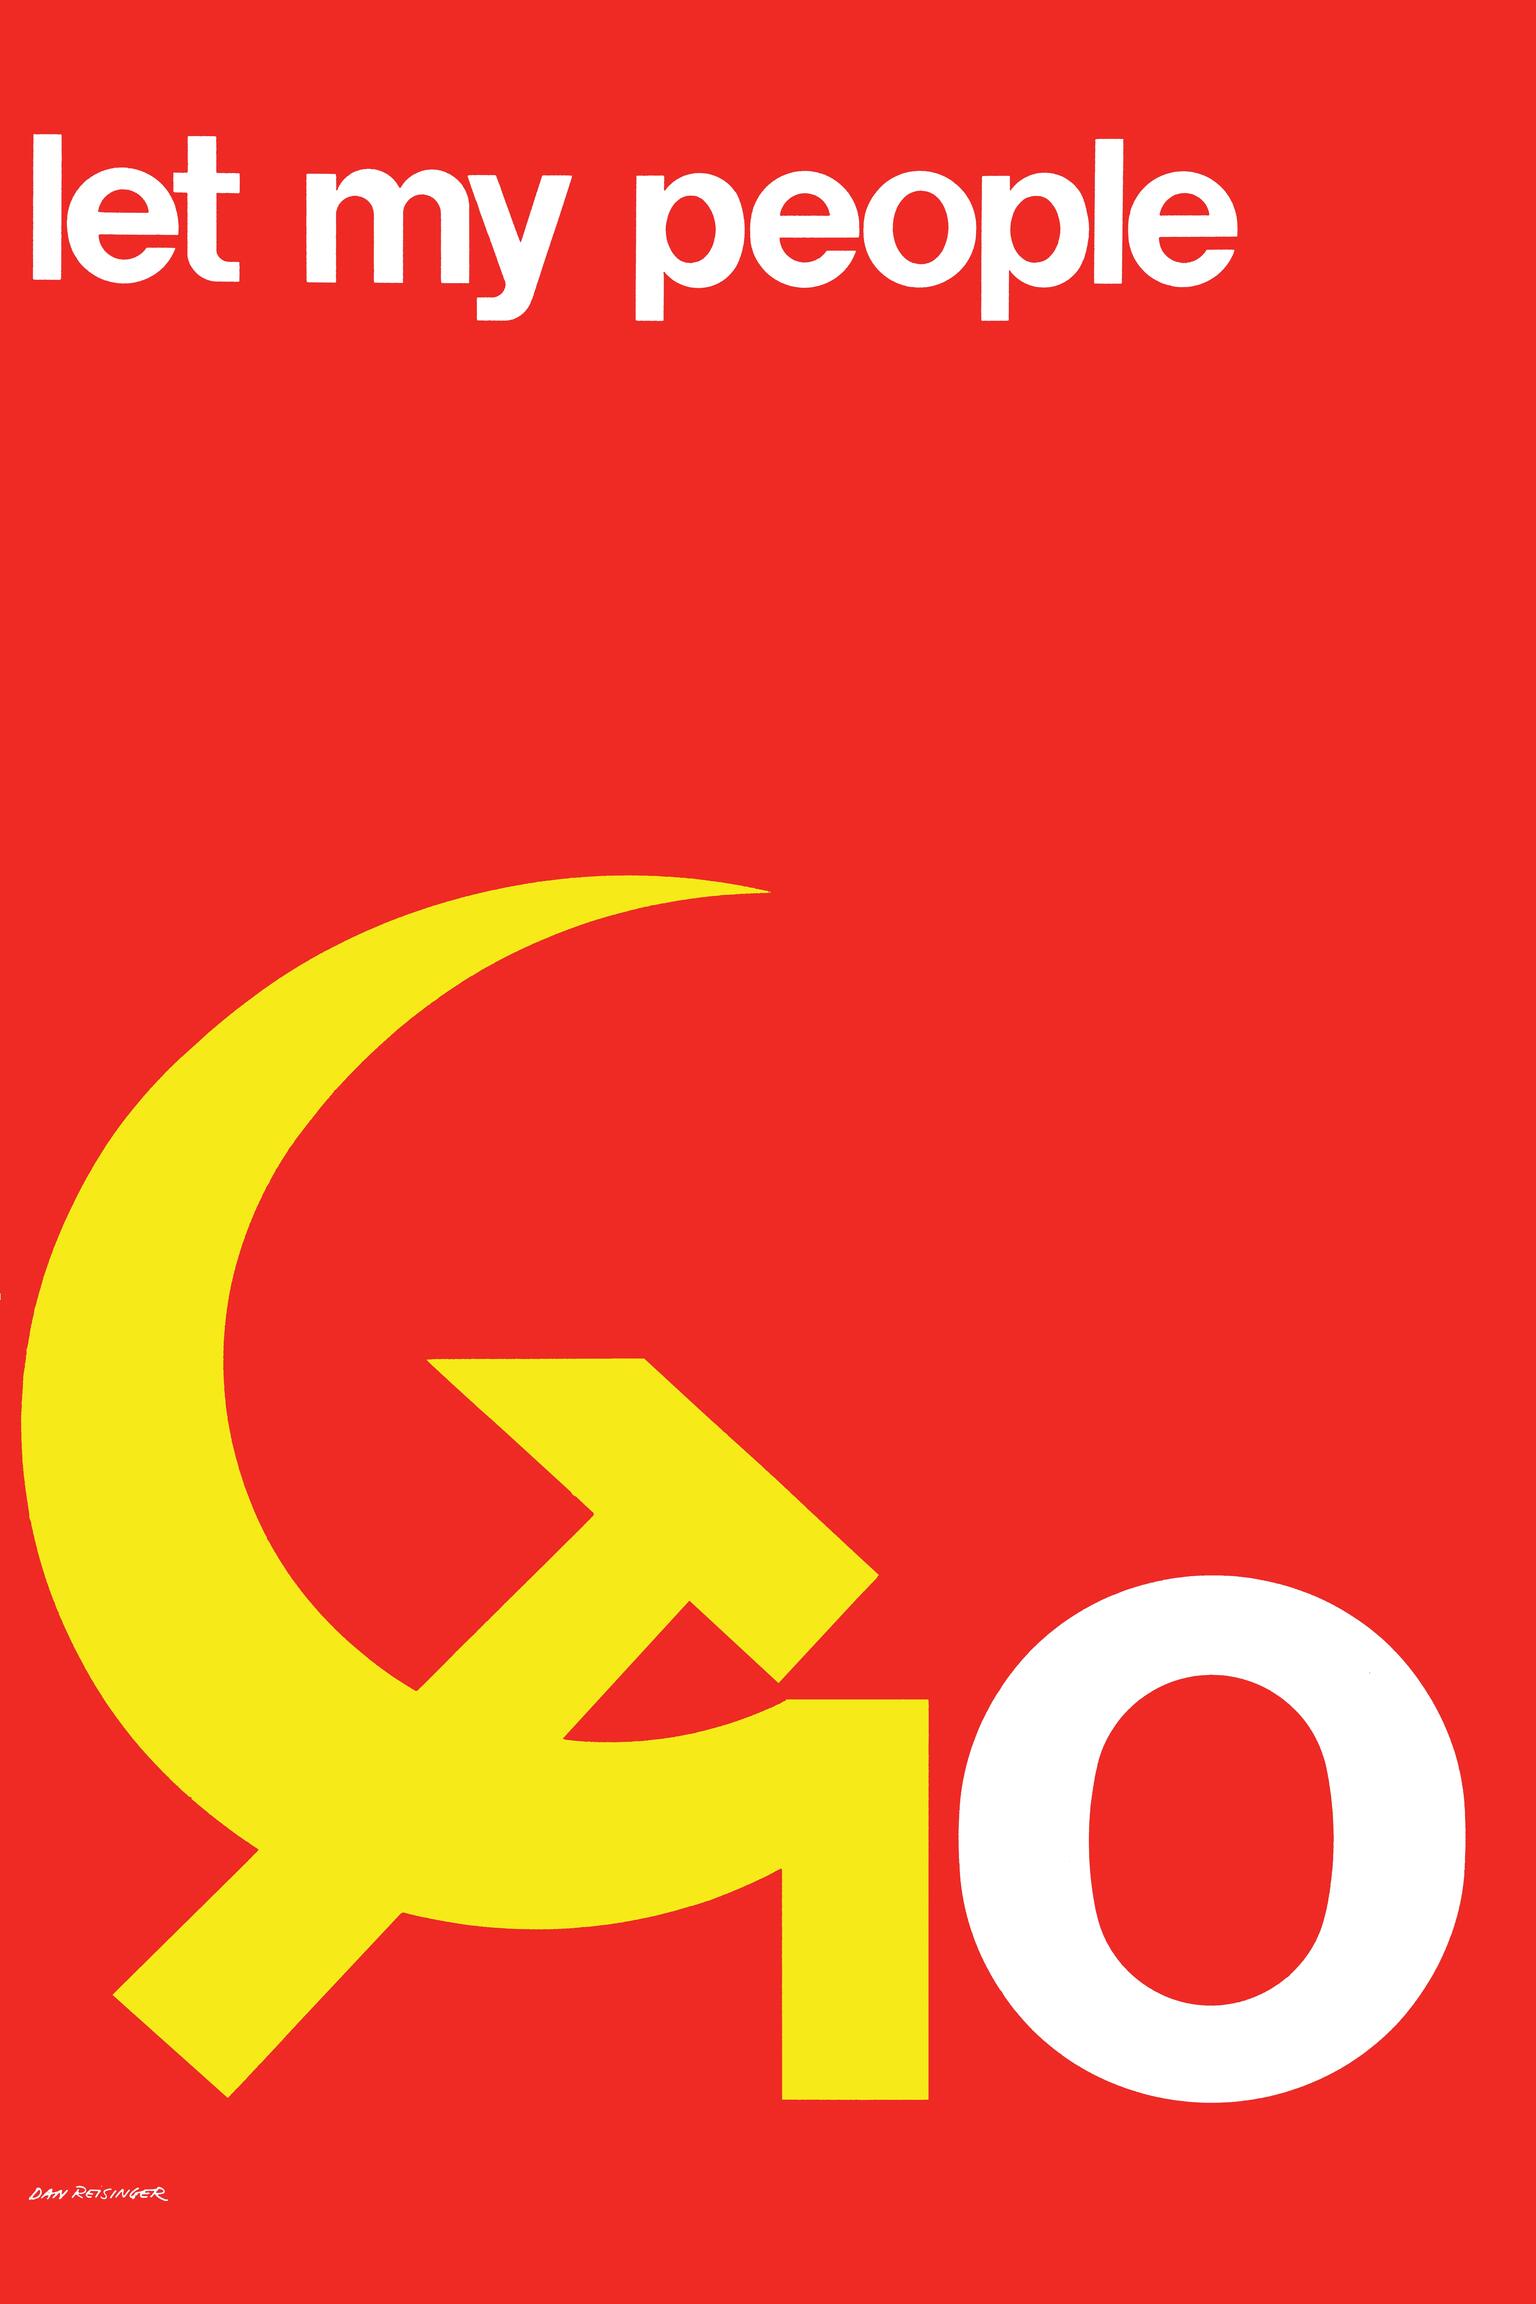 Poster featuring the text "let my people" across the top and followed by "GO" on the bottom, comprised of a hammer and sickle as the"G" next to a large letter "O." 